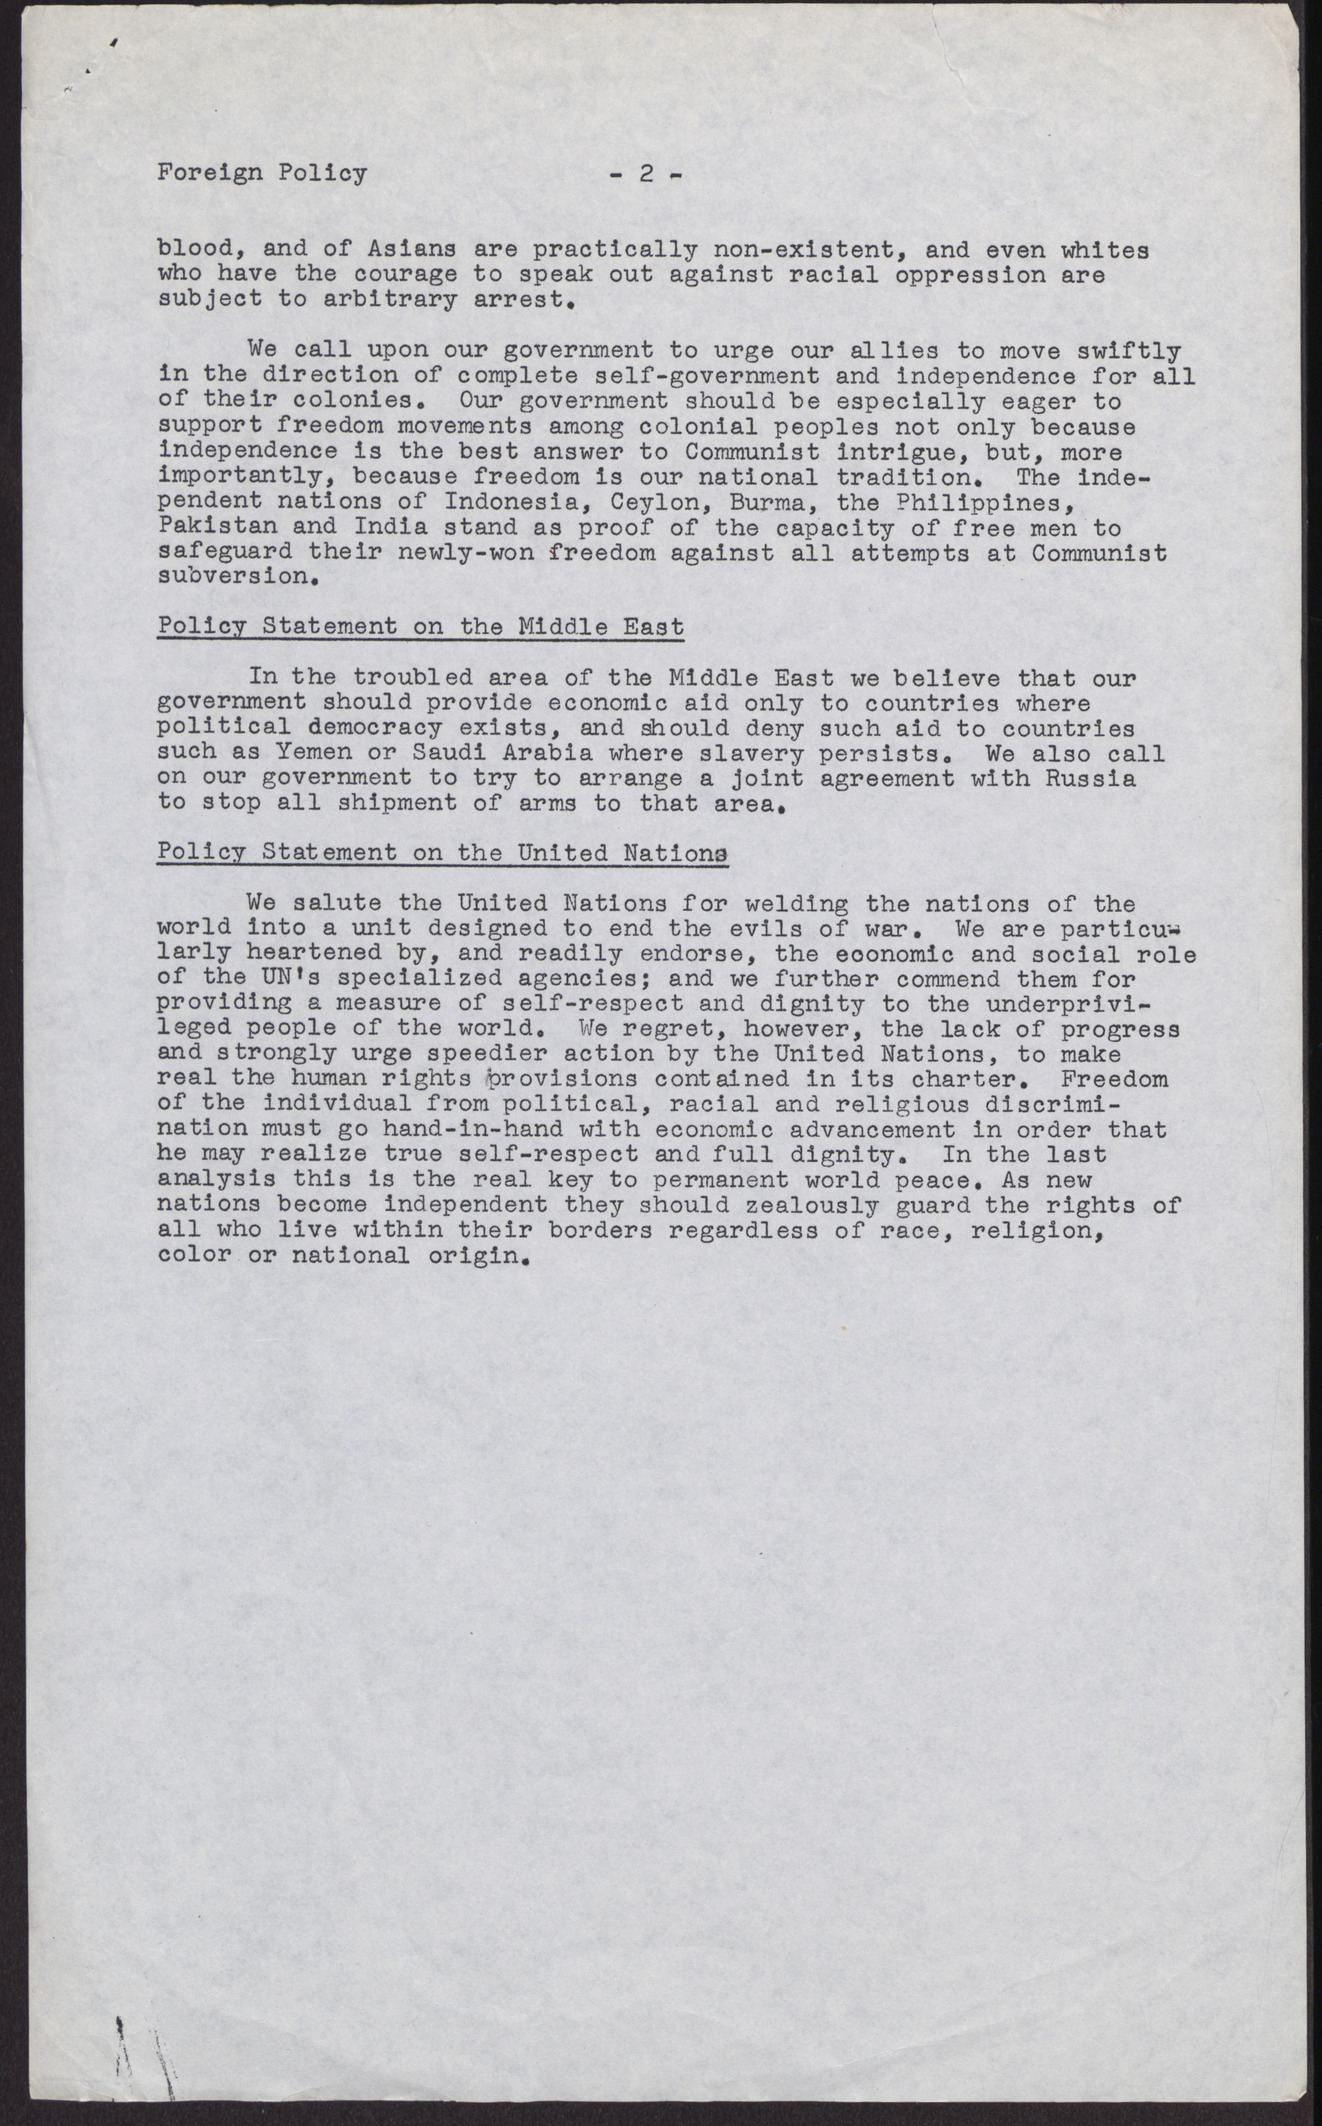 NAACP resolutions and statements of policy (3 pages), June 21-26, 1960, page 3